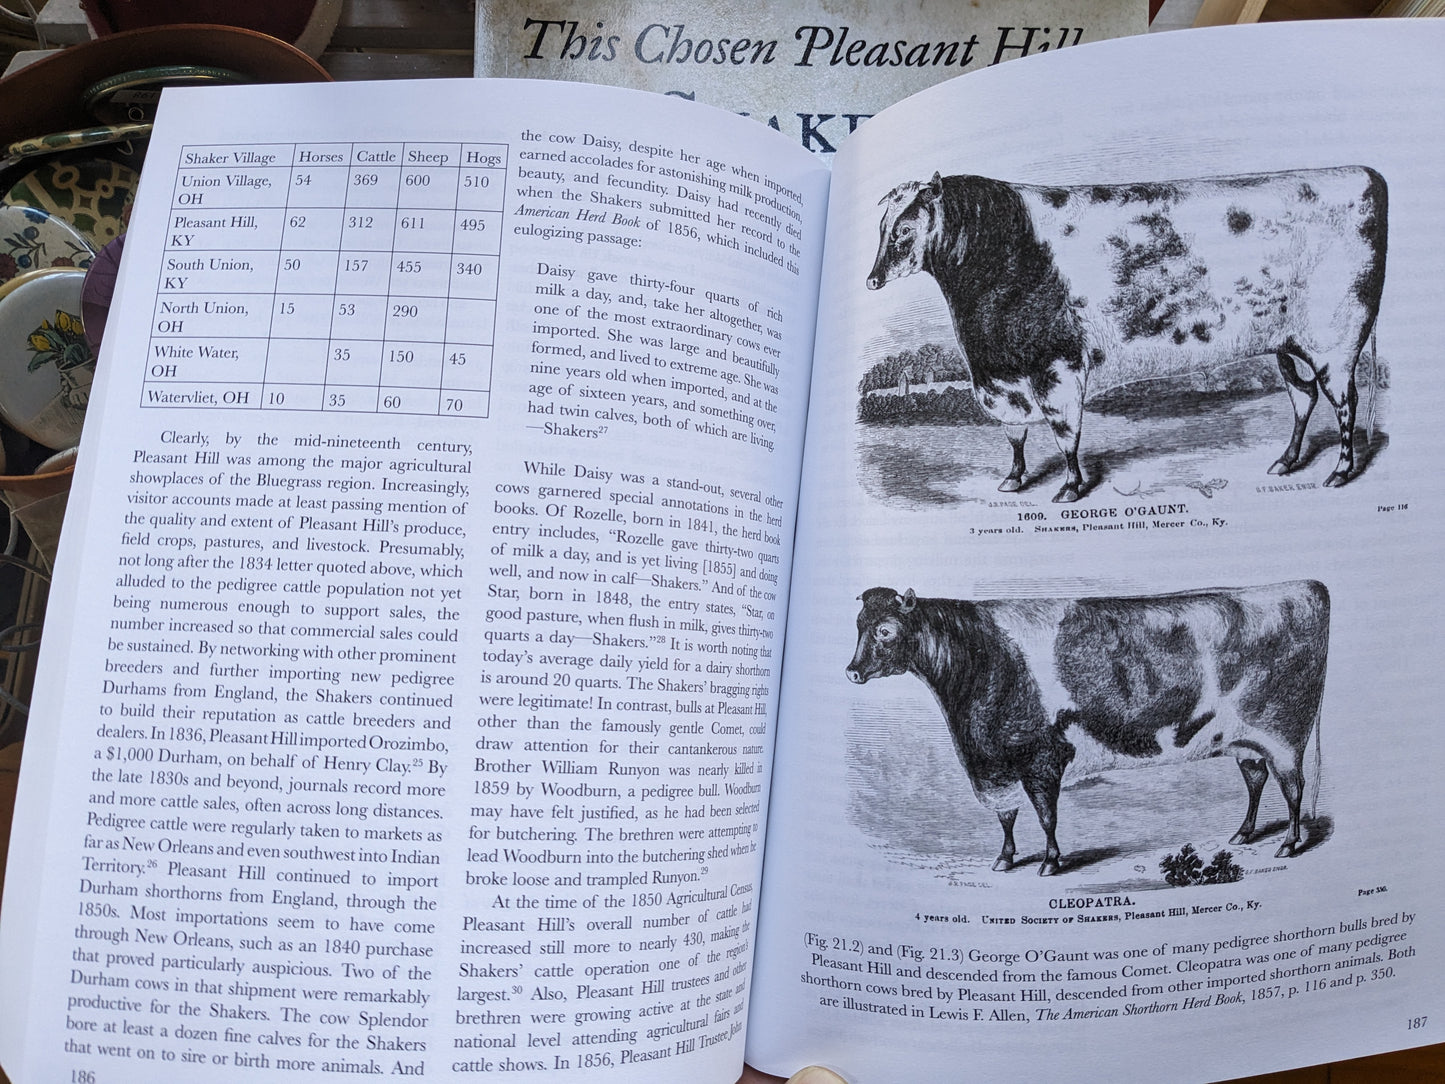 This Chosen Pleasant Hill: Shakers of the Kentucky Bluegrass